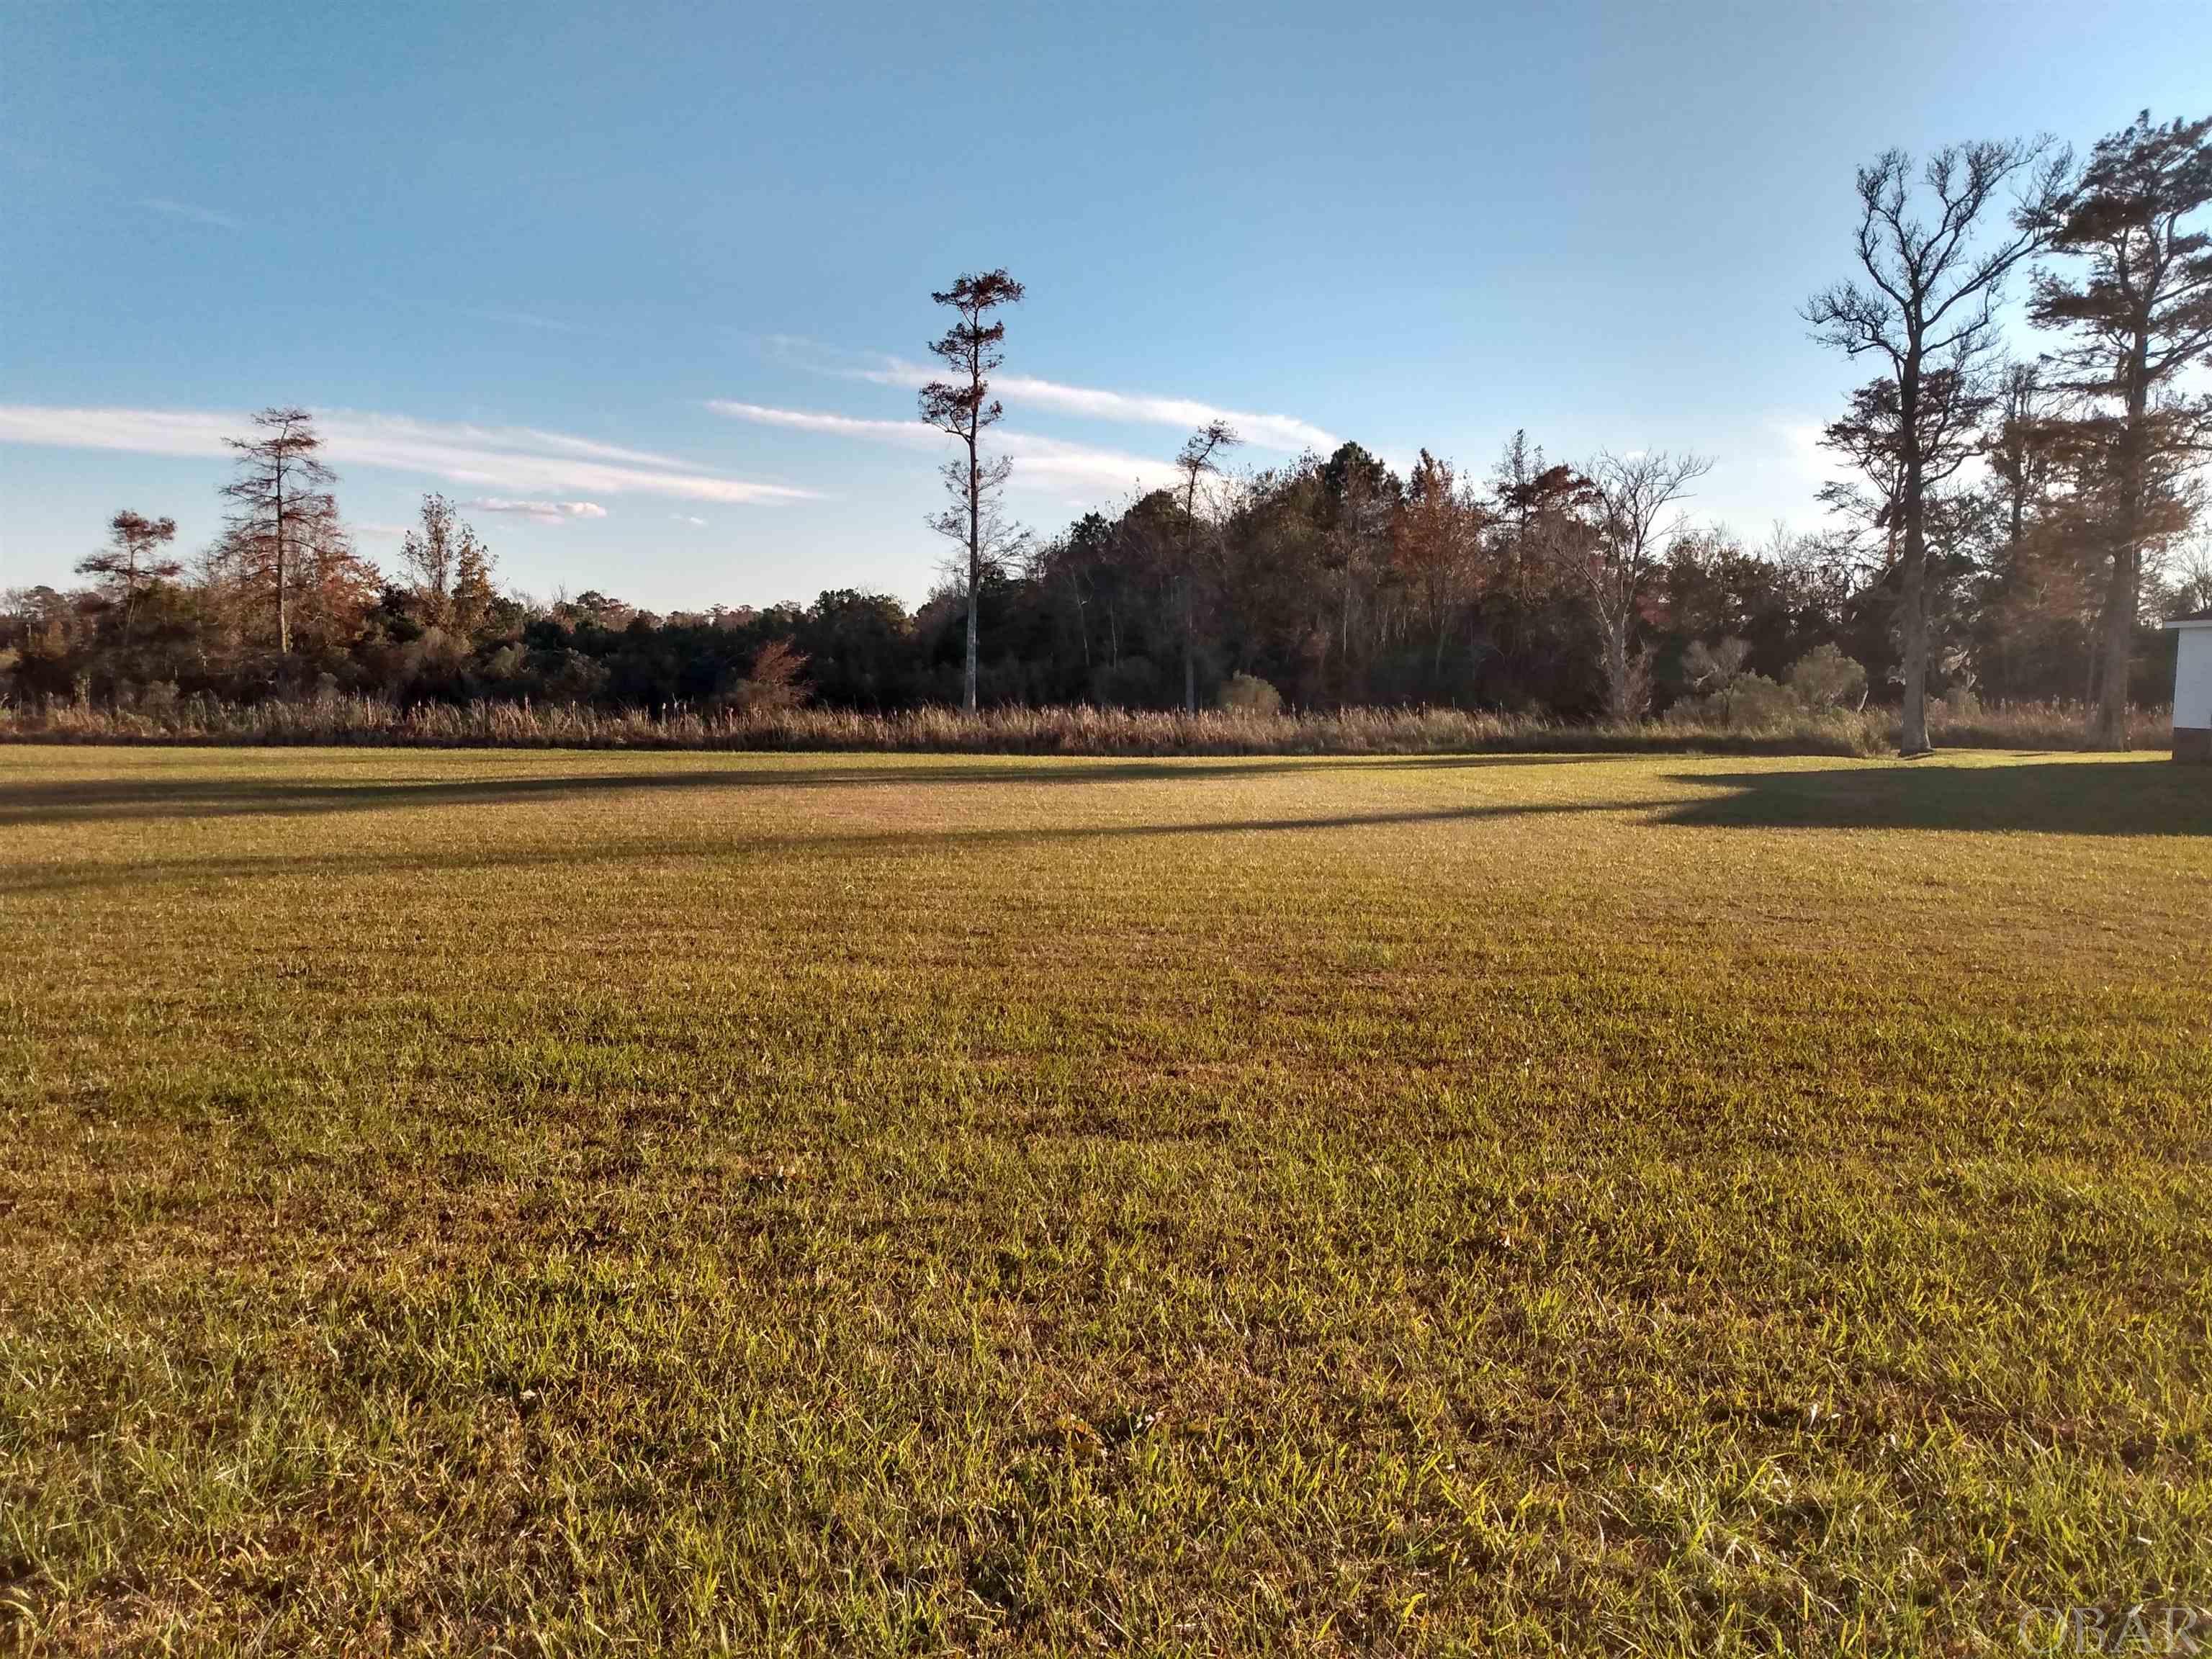 This canal lot provides spectacular views of the Albemarle Sound and gorgeous sunsets from the waterfront commons area! The rear of the lot is fronted by a canal navigable to the Albemarle Sound. The HOA and covenants have expired. An adjacent canal lot is also for sale. Underground utilities and permit for septic system available. Located just 5 miles north of Columbia, N.C. and within an hour of Nags Head, N.C. Priced to sell at only $27,500!